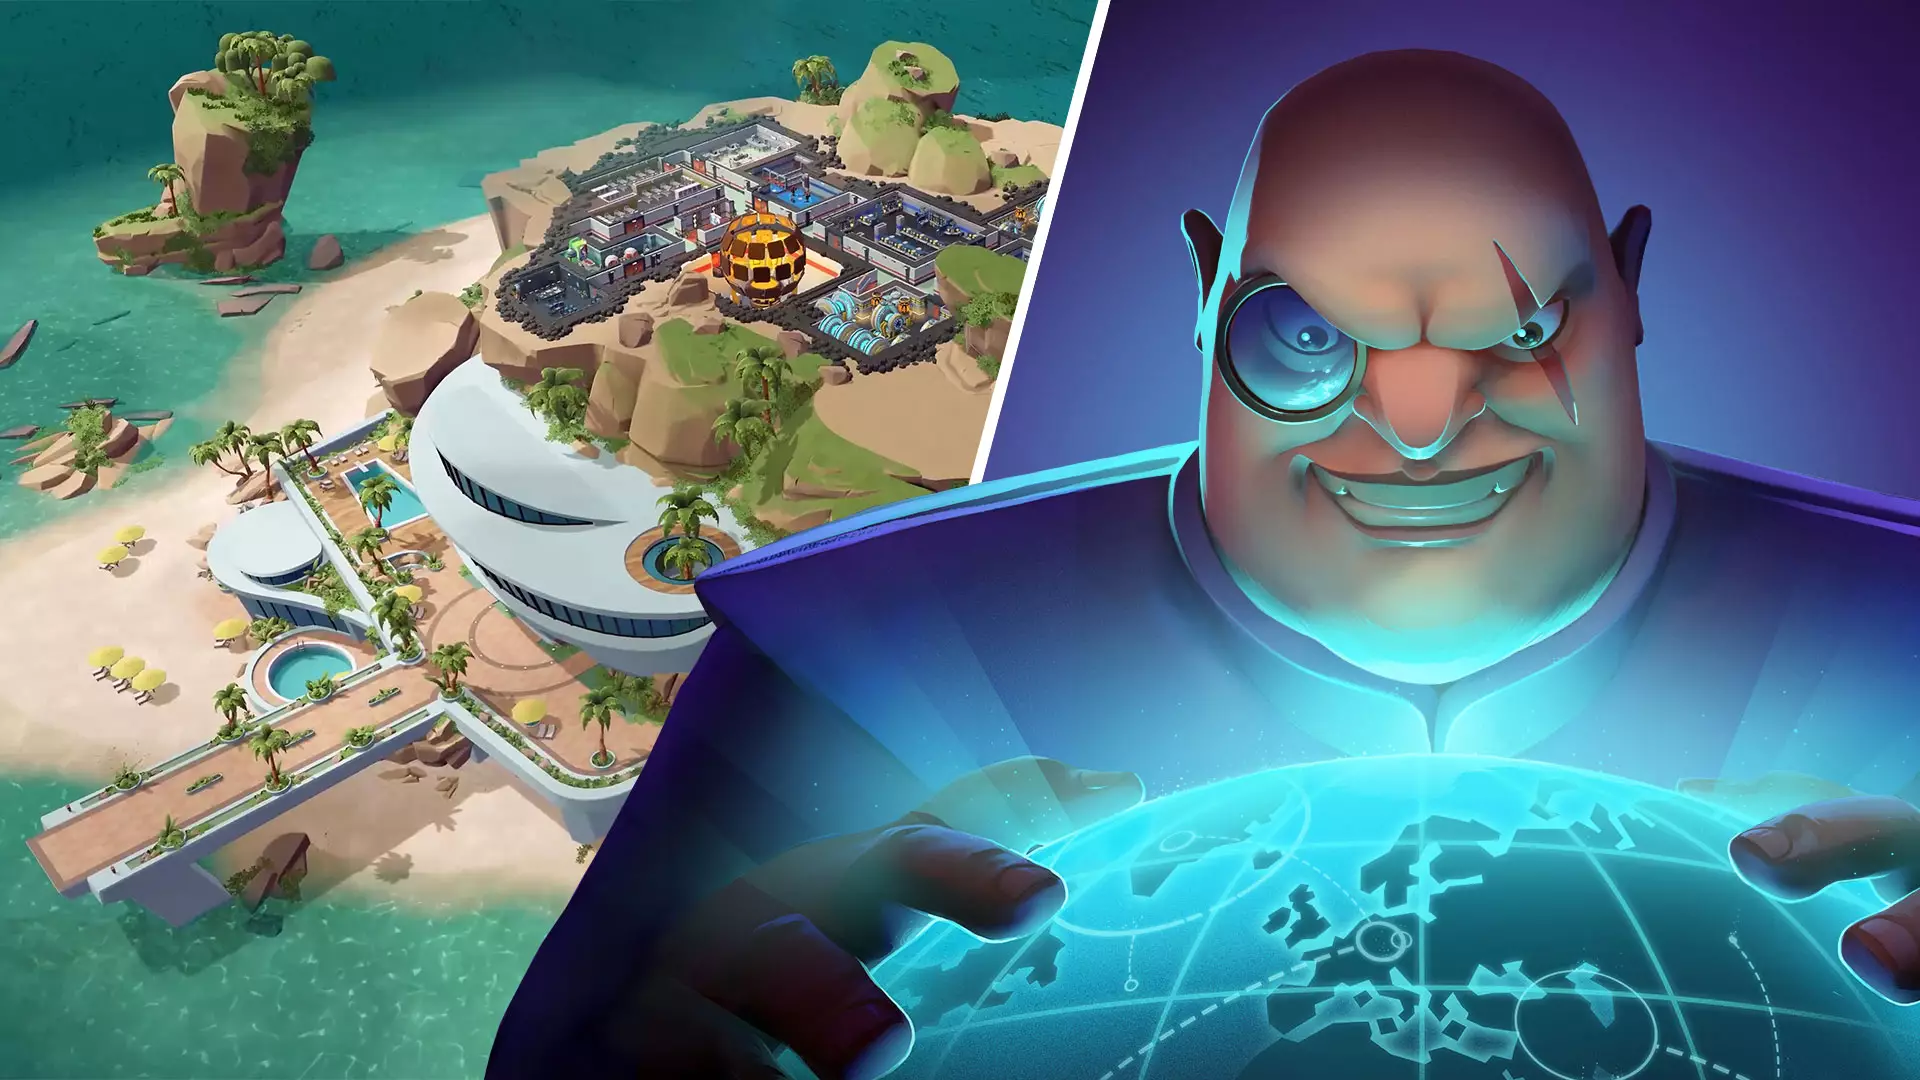 ‘Evil Genius 2’ Review: Looks The Part But Quickly Becomes Repetitive